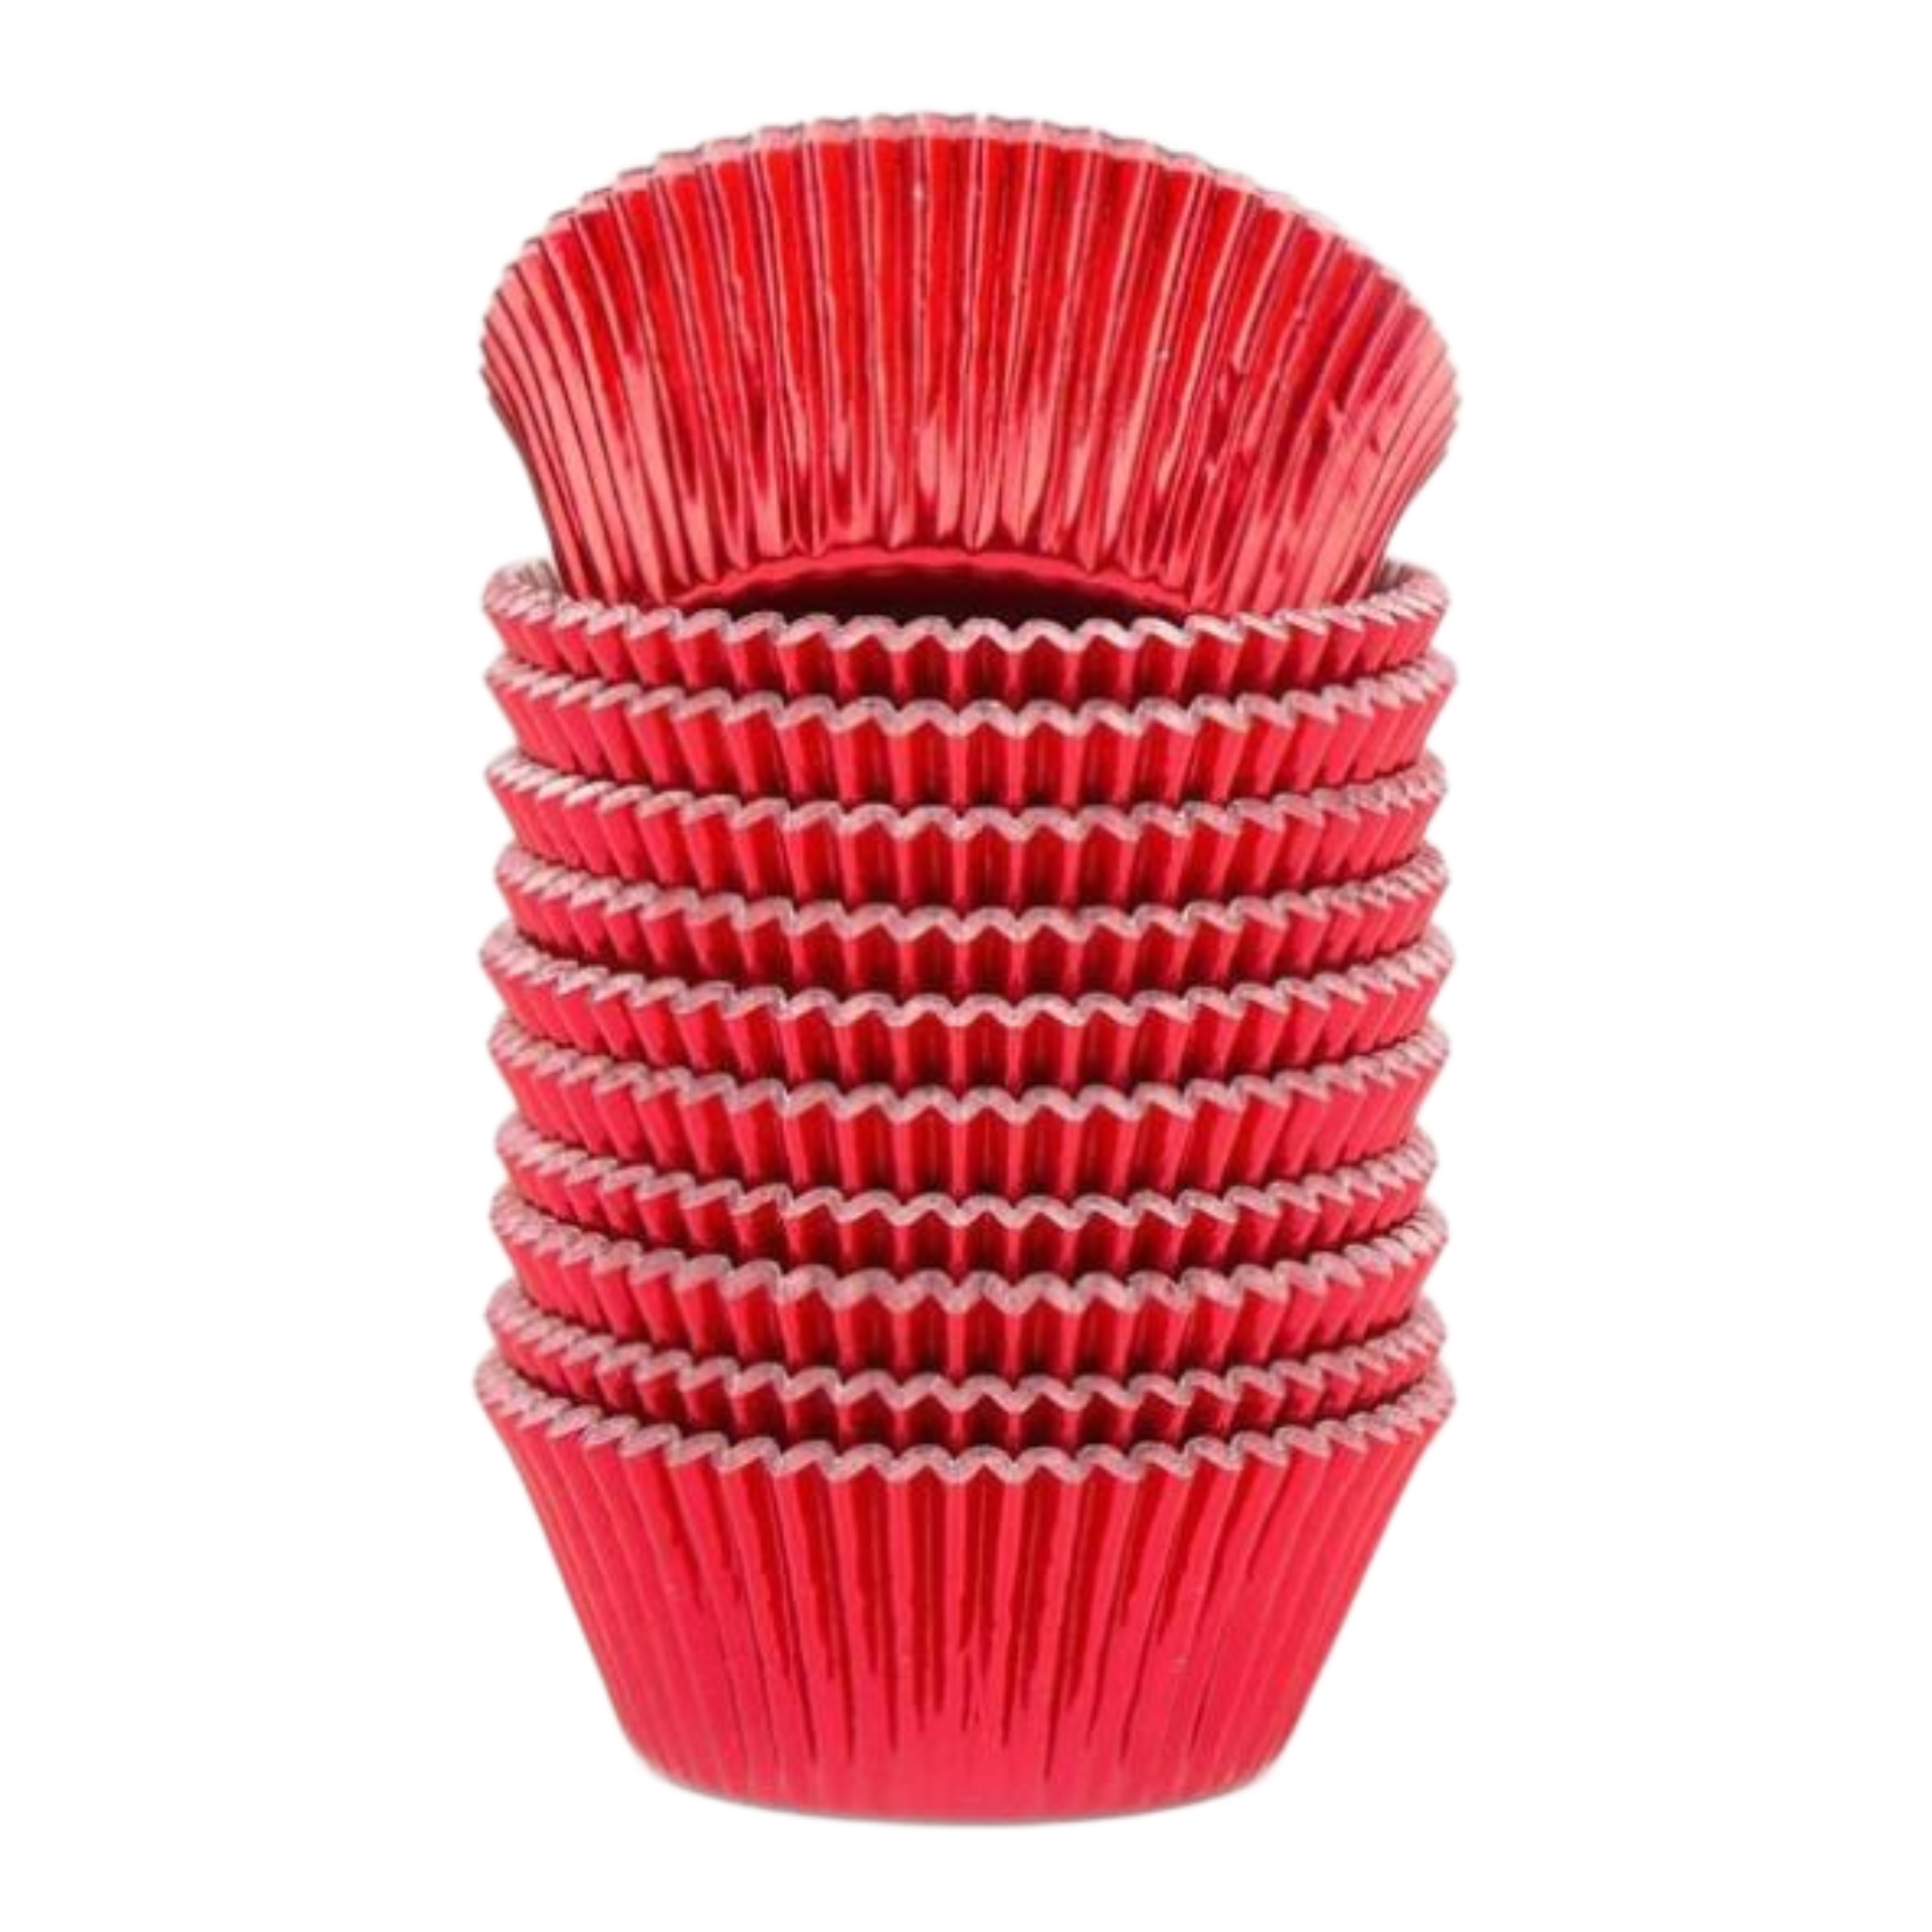 https://jykcakes.com/wp-content/uploads/2023/11/Red-Cupcake-Liners-jykcakes.png